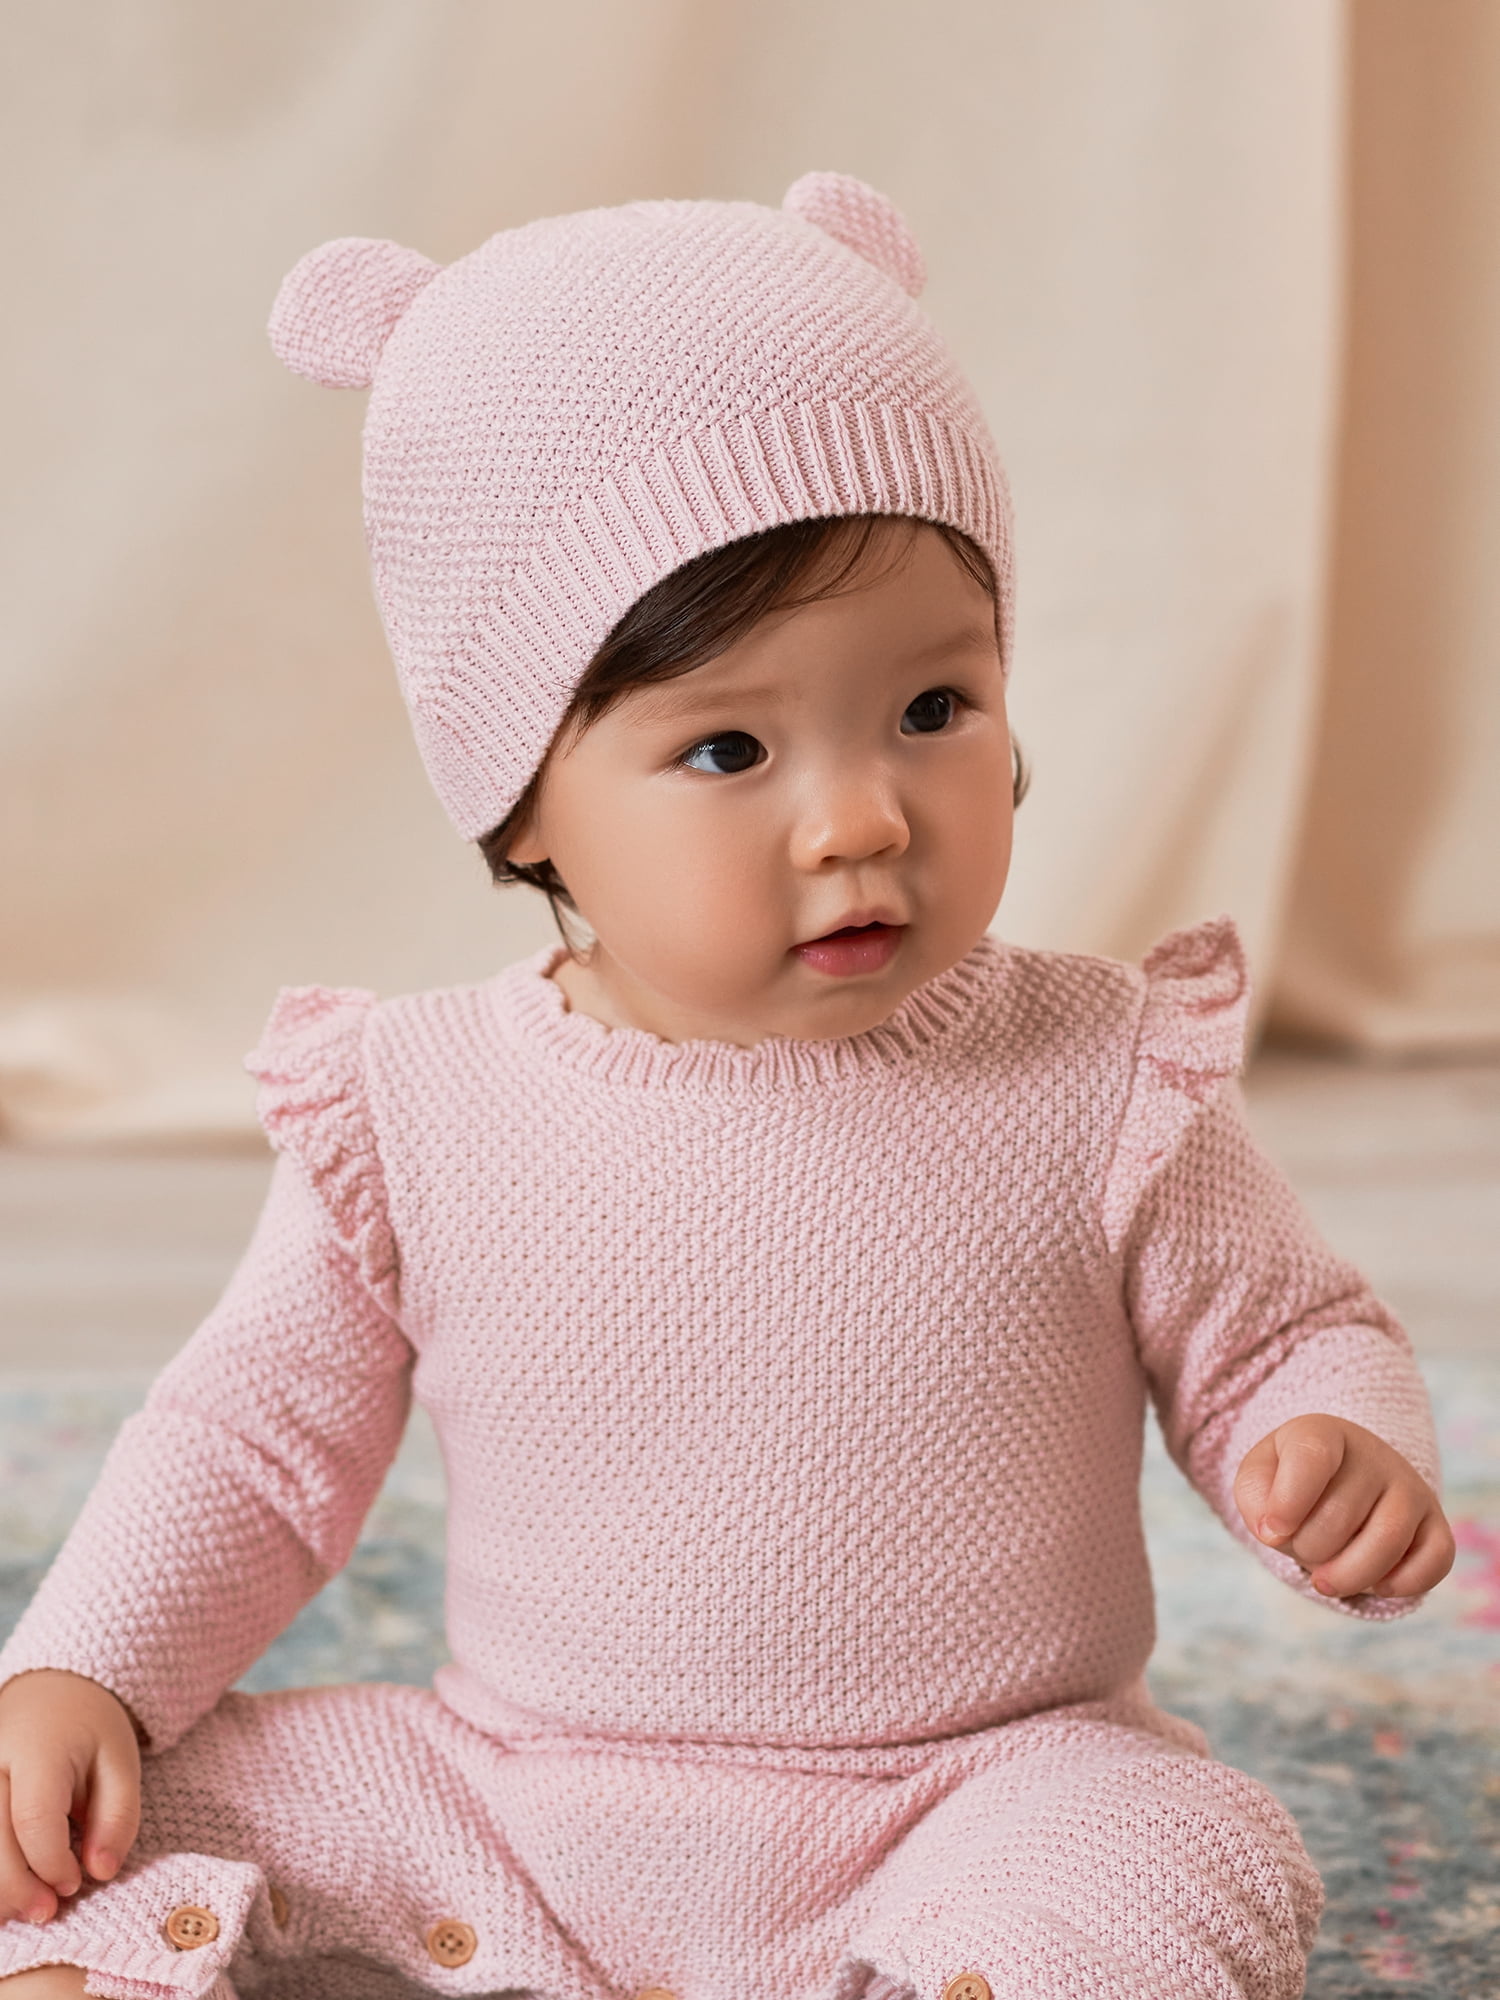 Baby Girl Boy Knit Sweater Solid Oversized Sweater Crewneck Sweatshirt Pullover Top Infant Warm Clothes